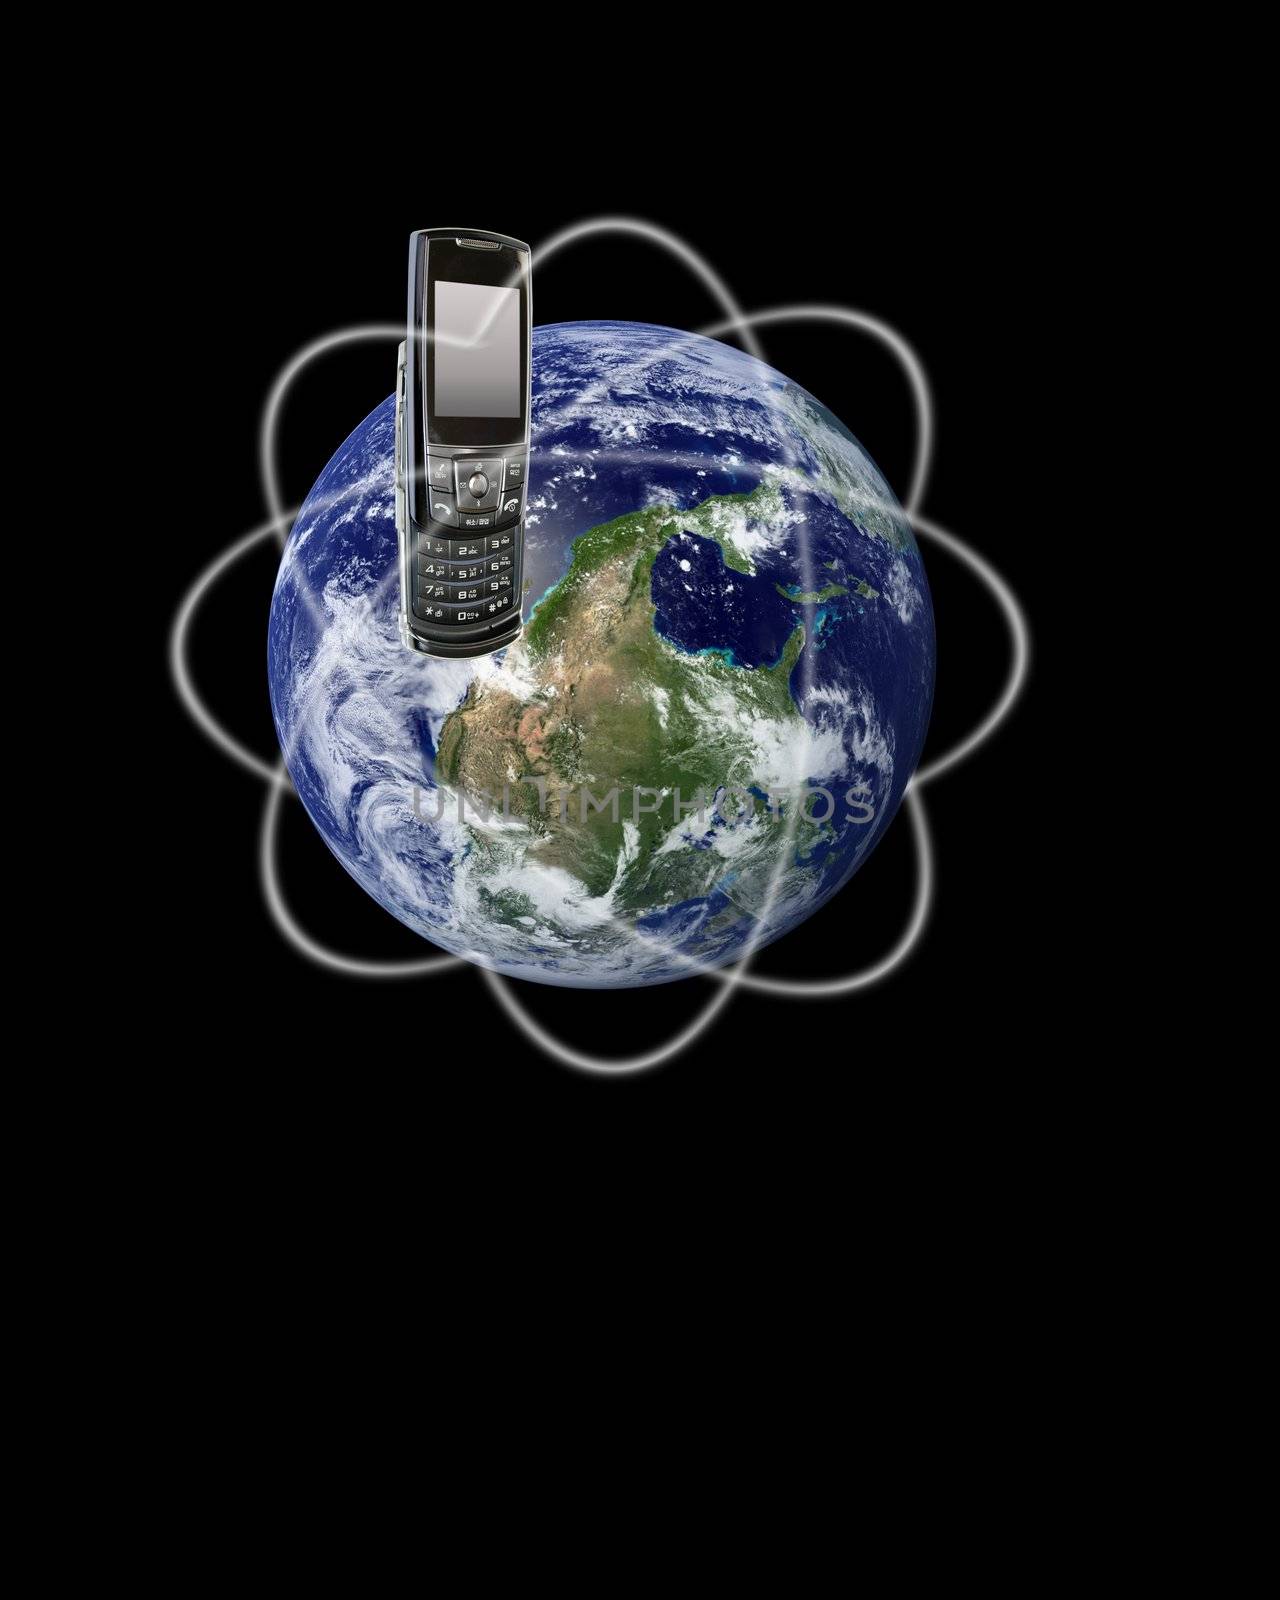 Abstract of Global Communication - Globe encircle with beams and a cellular phone.